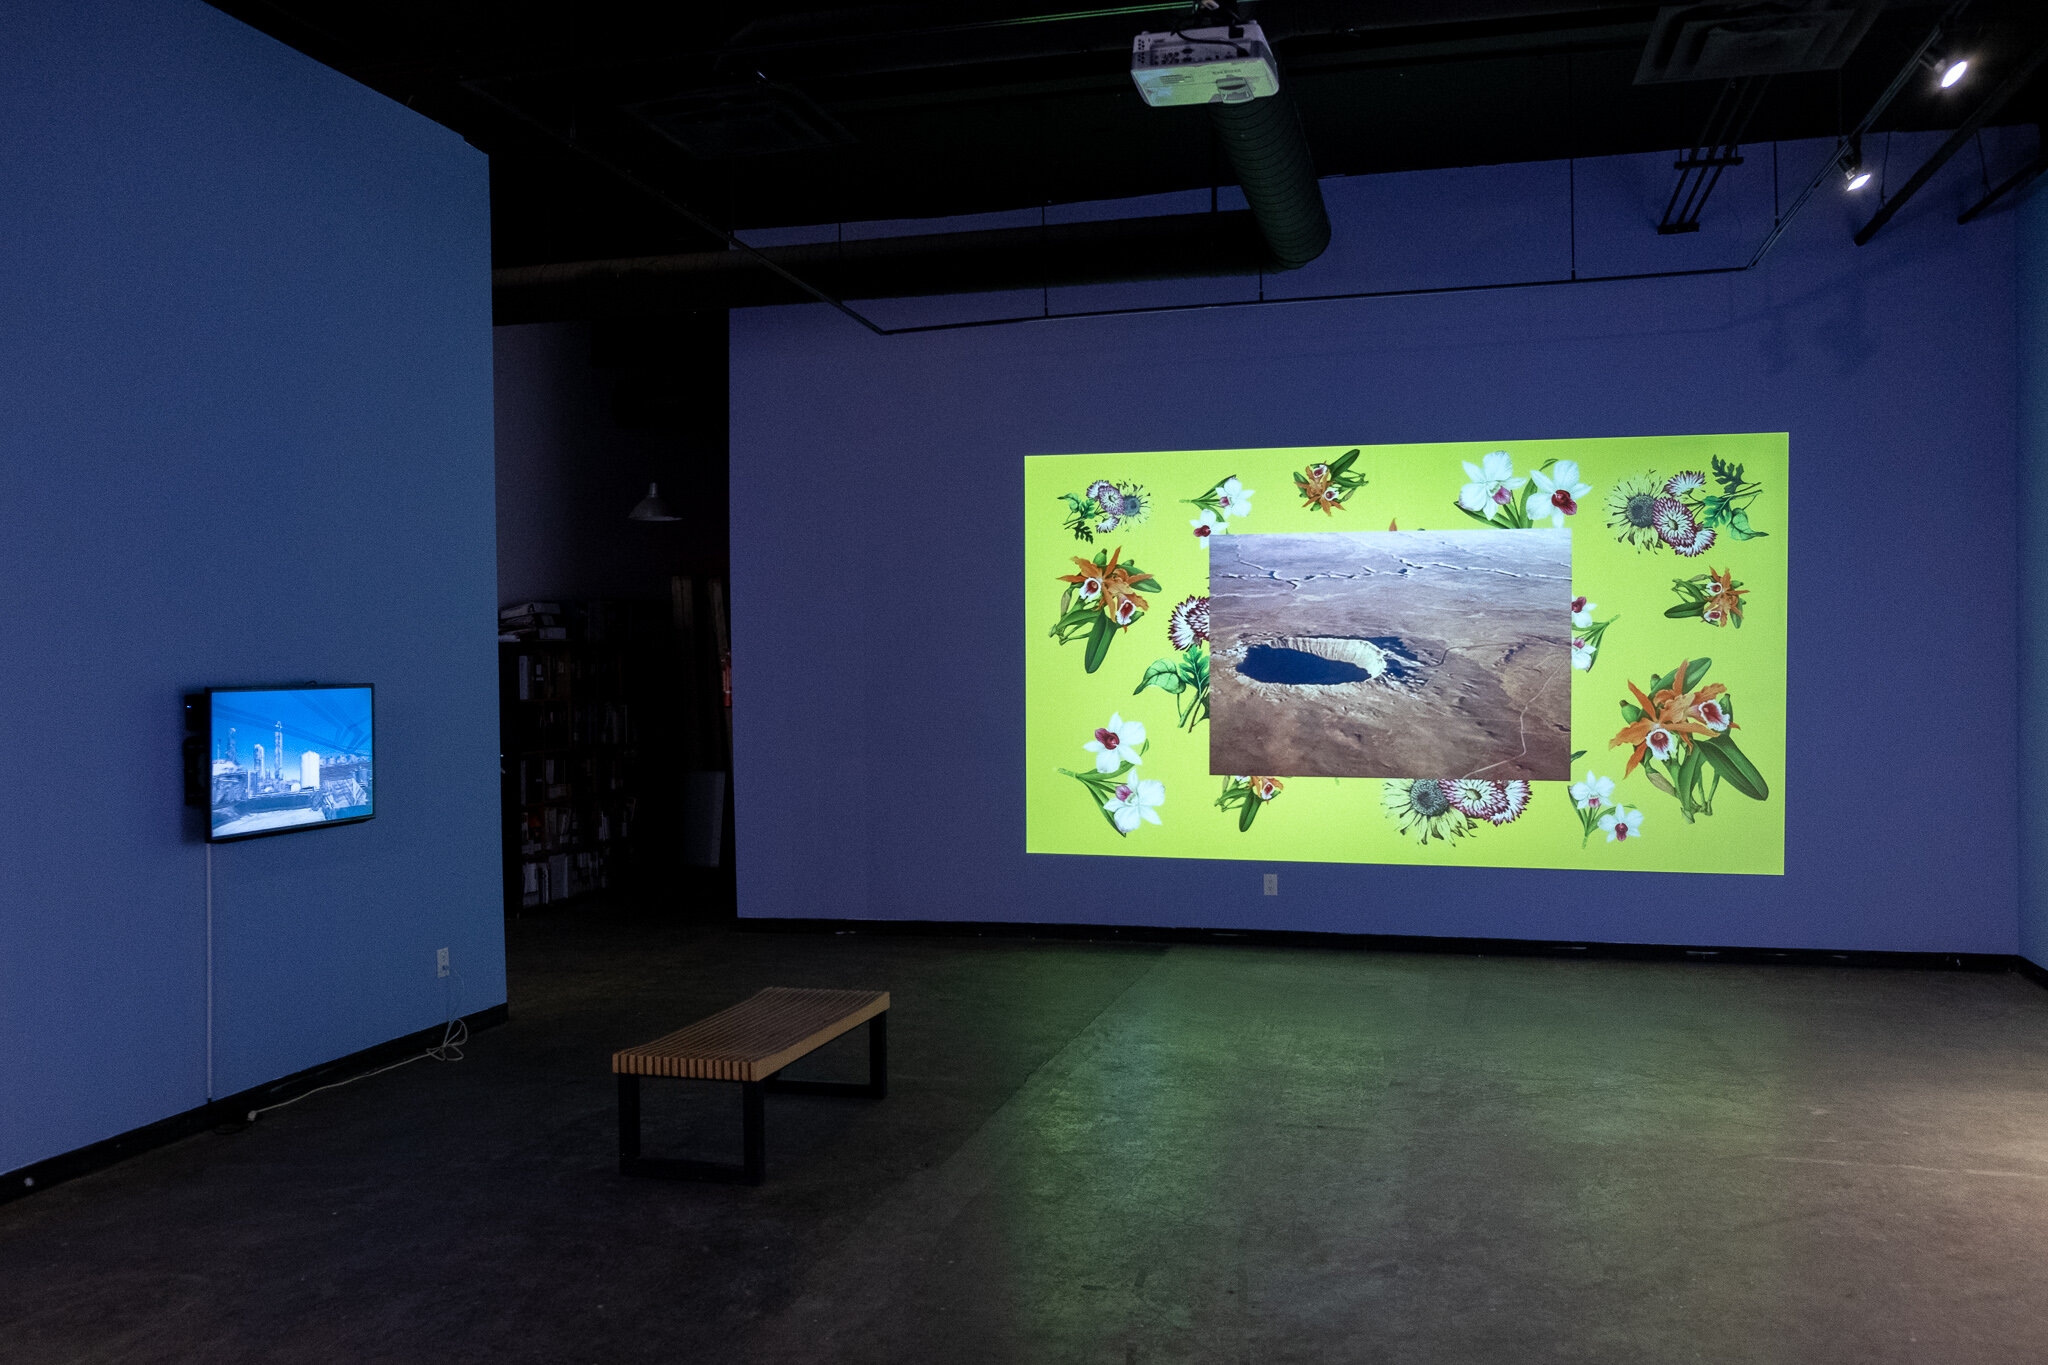  A view into the exhibition “Even the Birds are Walking”. On the wall in front of us, there is a projection of a video. The background of the video is yellow with images of white, orange, and purple flowers. On top of this background, there is a pict